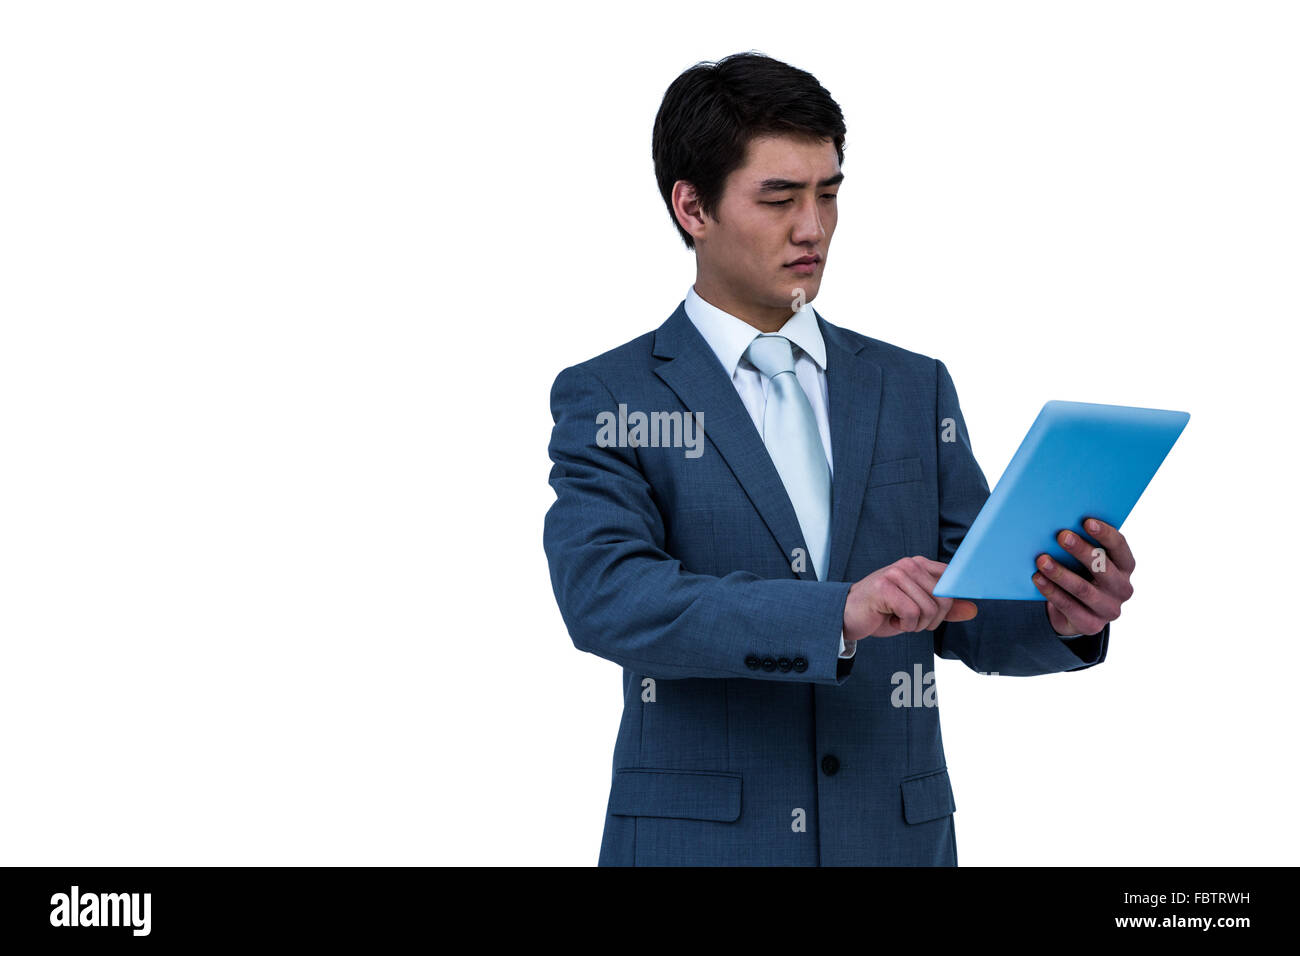 Businessman using his tablet Stock Photo